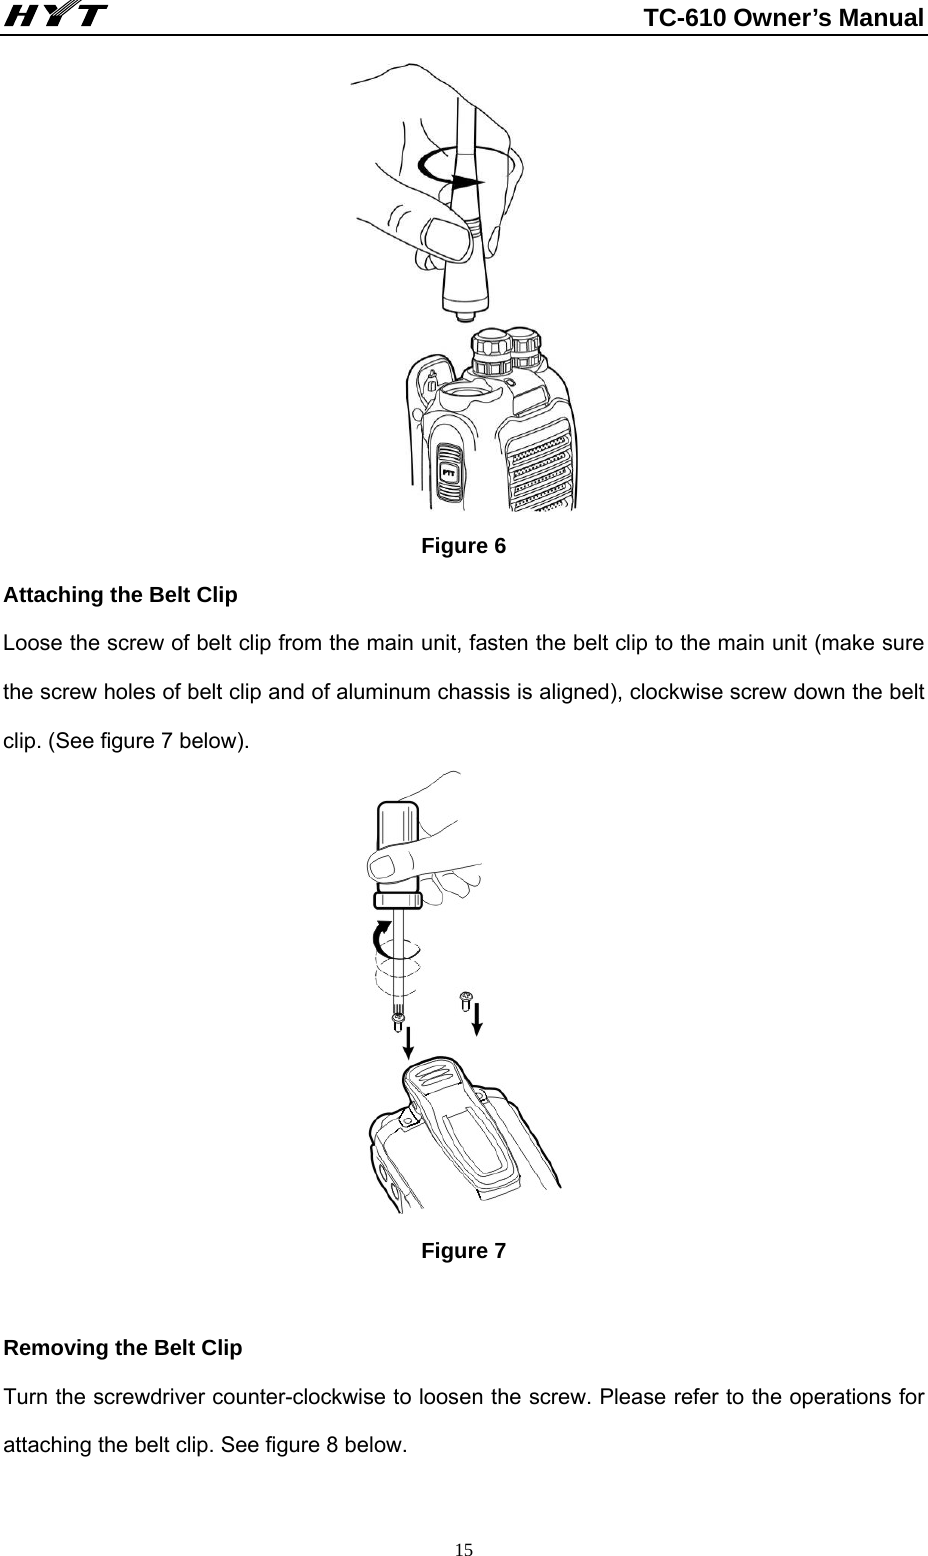                                                          TC-610 Owner’s Manual  15 Figure 6 Attaching the Belt Clip     Loose the screw of belt clip from the main unit, fasten the belt clip to the main unit (make sure the screw holes of belt clip and of aluminum chassis is aligned), clockwise screw down the belt clip. (See figure 7 below).           Figure 7  Removing the Belt Clip   Turn the screwdriver counter-clockwise to loosen the screw. Please refer to the operations for attaching the belt clip. See figure 8 below.          